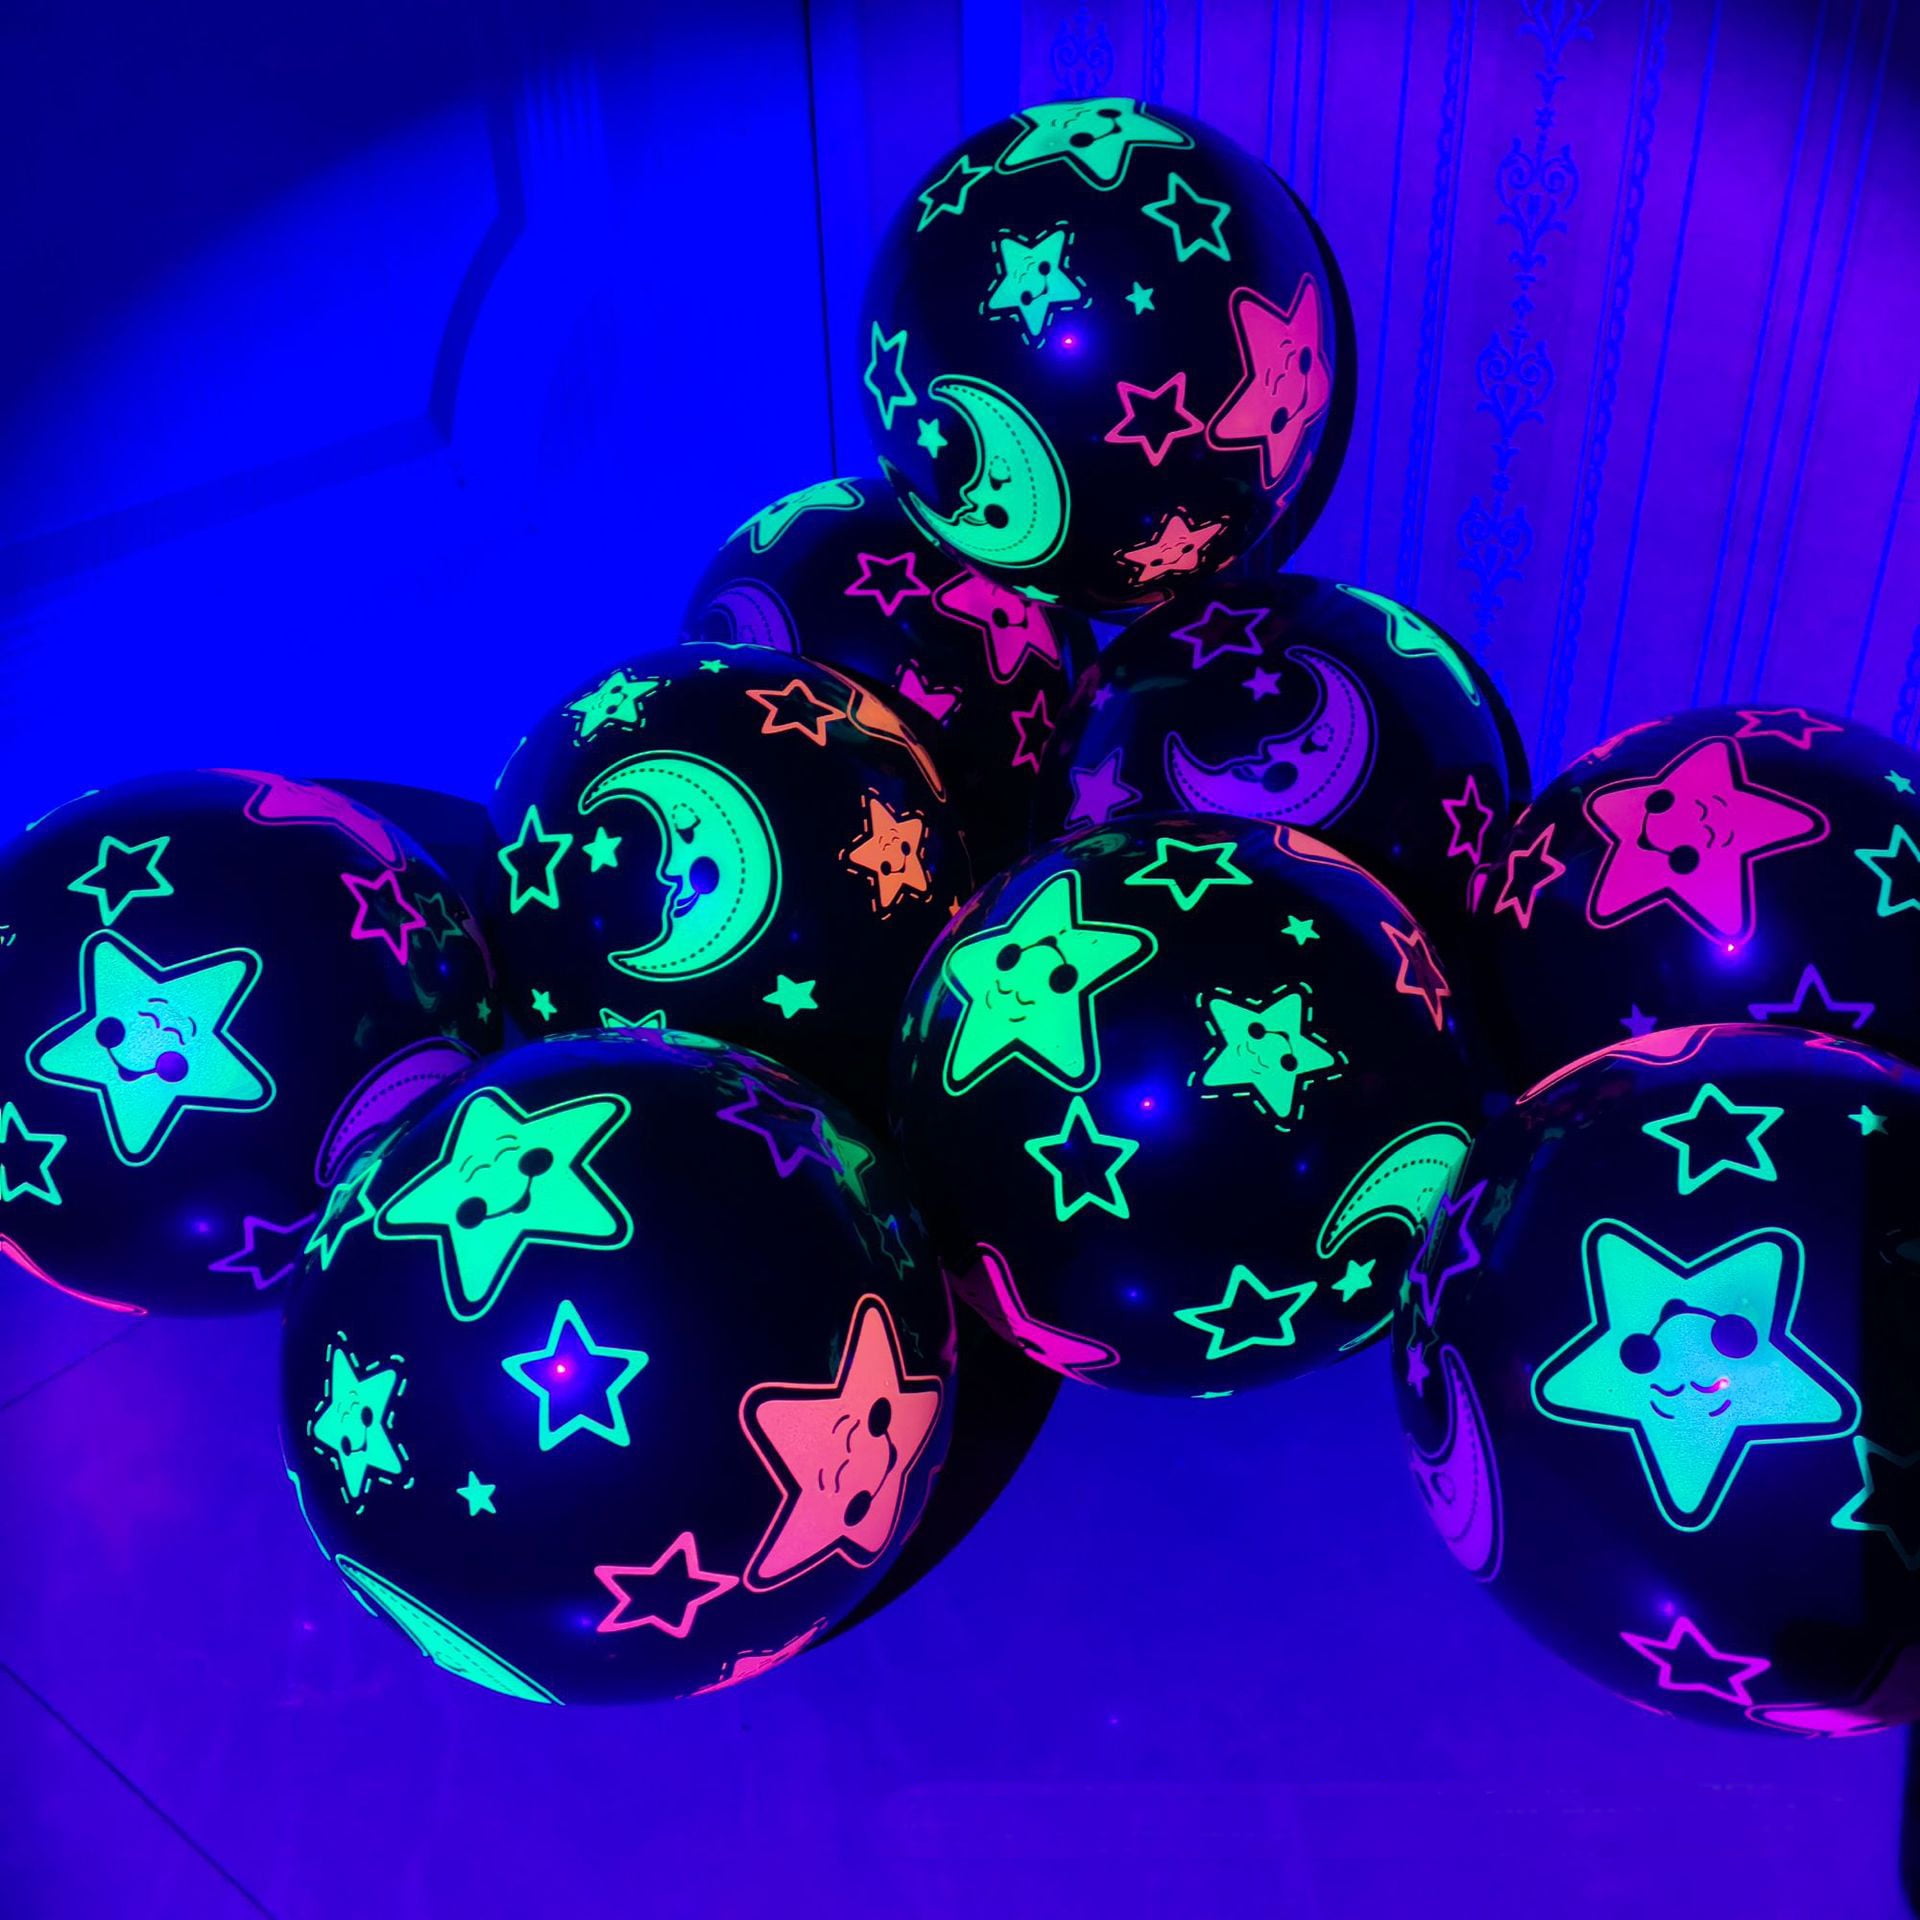 100 Pcs UV Neon Balloons , Neon Glow Party Balloons UV Black Light Balloons Glow in The Dark for Birthday Decorations Wedding Glow Party Supplies